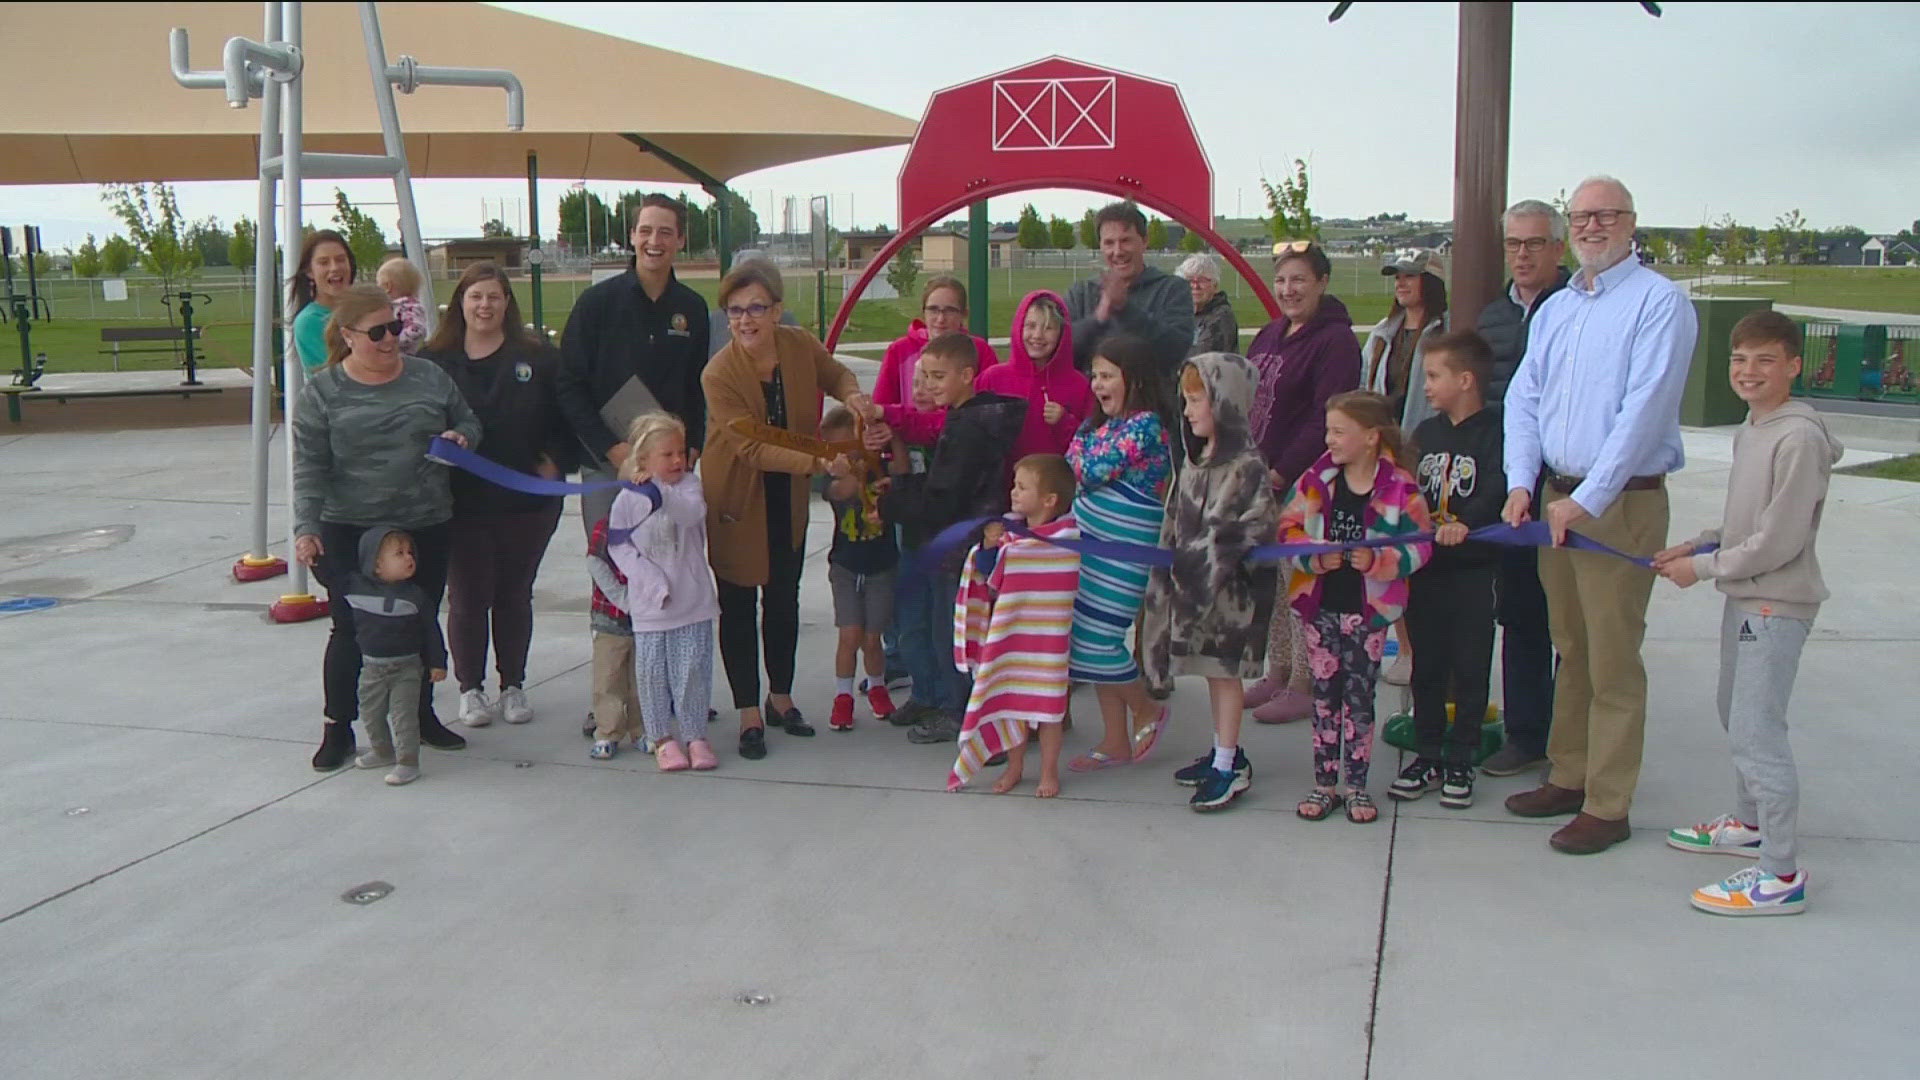 City officals held a ribbon cutting to celebrate the new features at Midway Park.